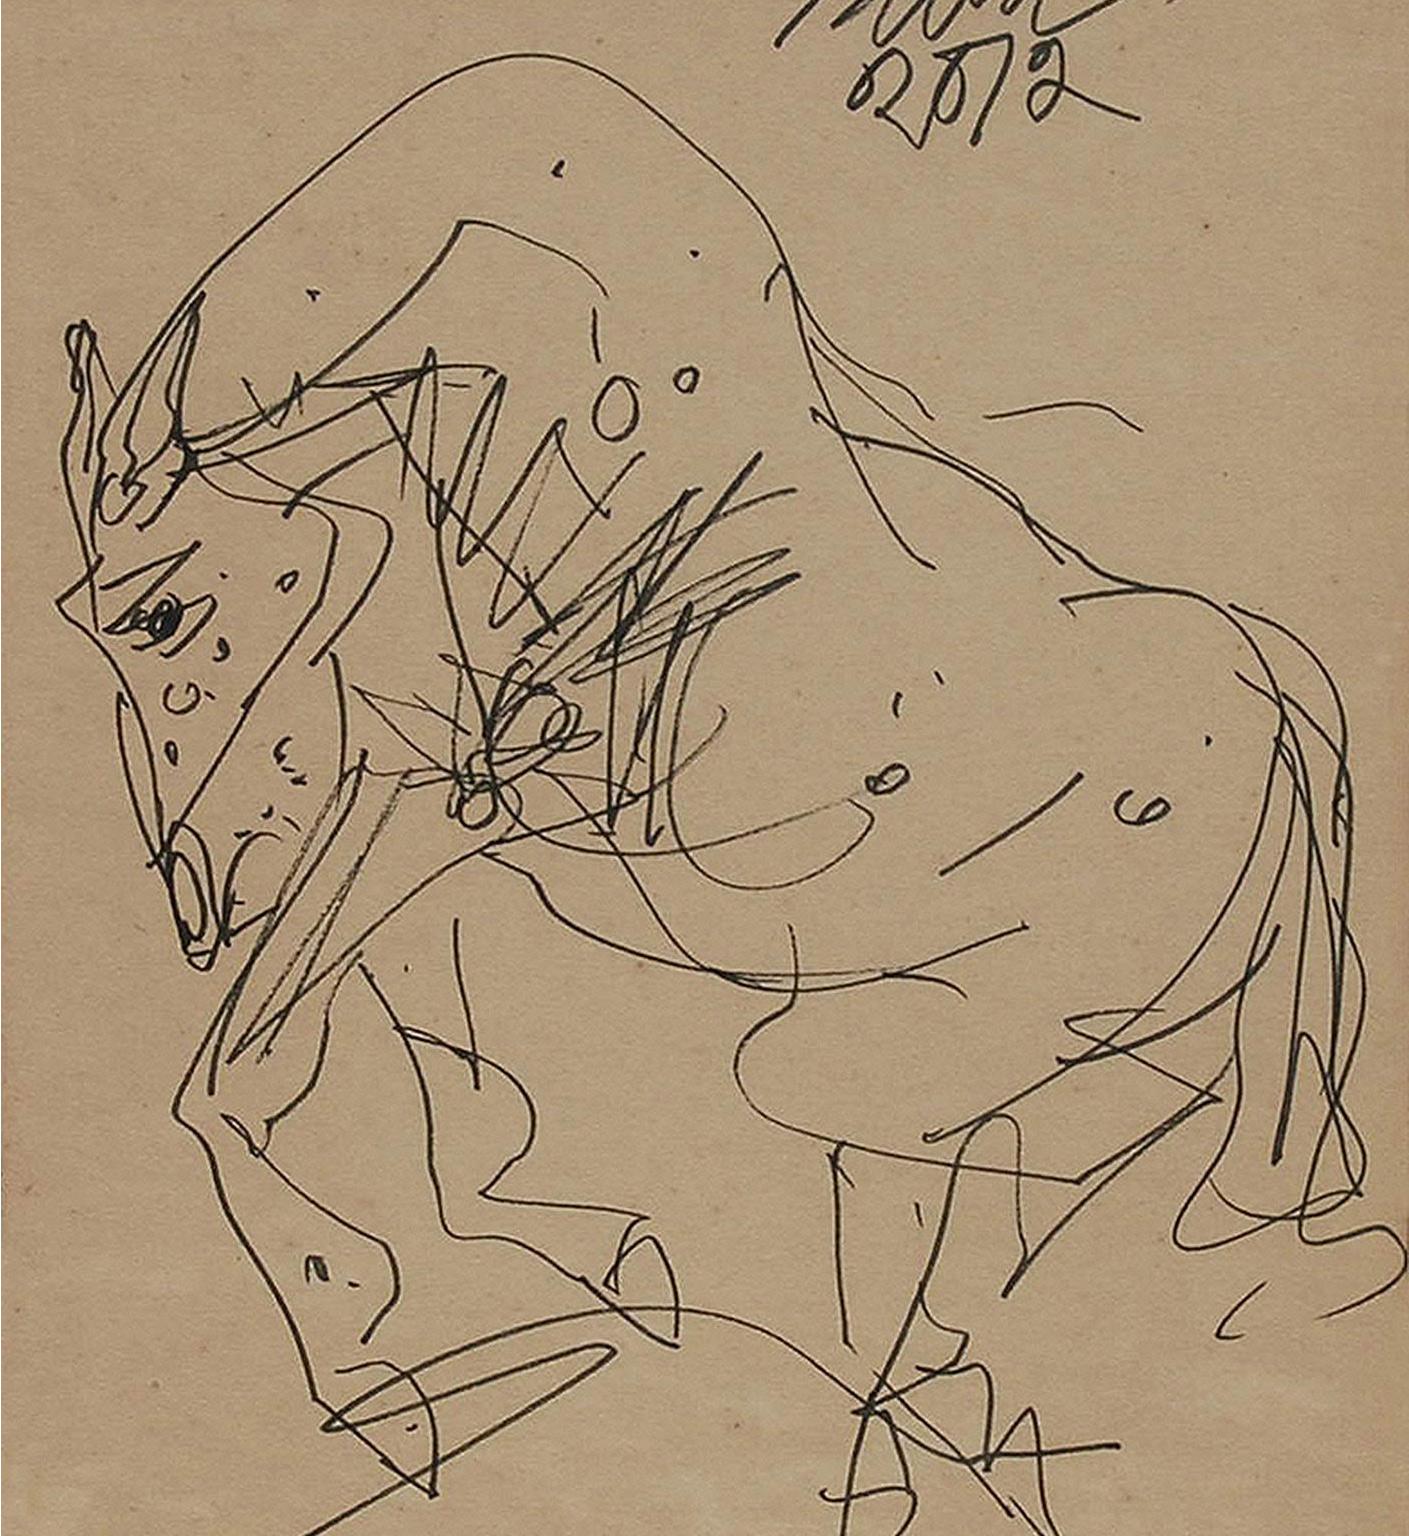 Sunil Das - Horse - 9.5 x 7 inches (unframed size)
Ink on Paper
Inclusive of shipment in ready to hang form.

Sunil Das was one of India's most important postmodernist painters and rose to prominence through his drawings of horses. He captured their